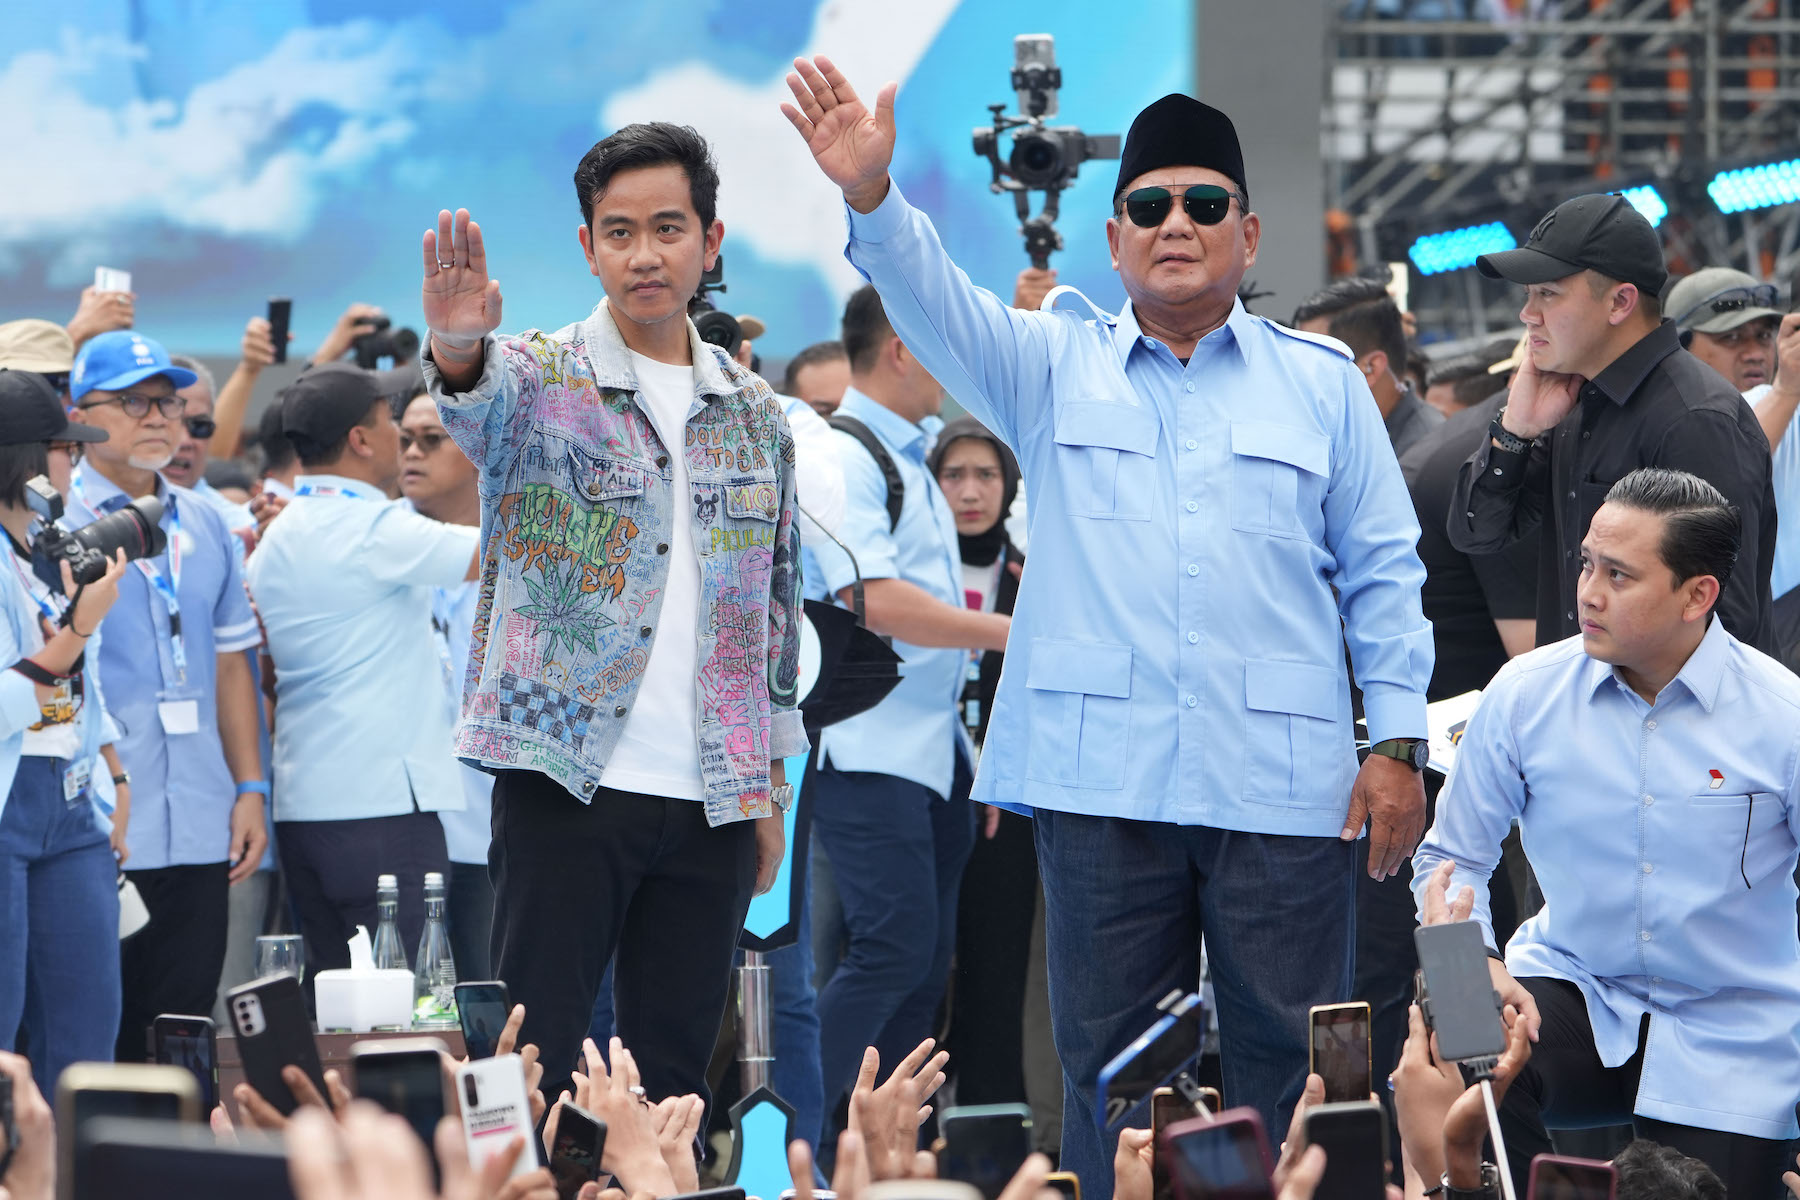 This Feared General Who Rebranded As A Cute TikTok Grandpa Is Set To Become Indonesia’s New President